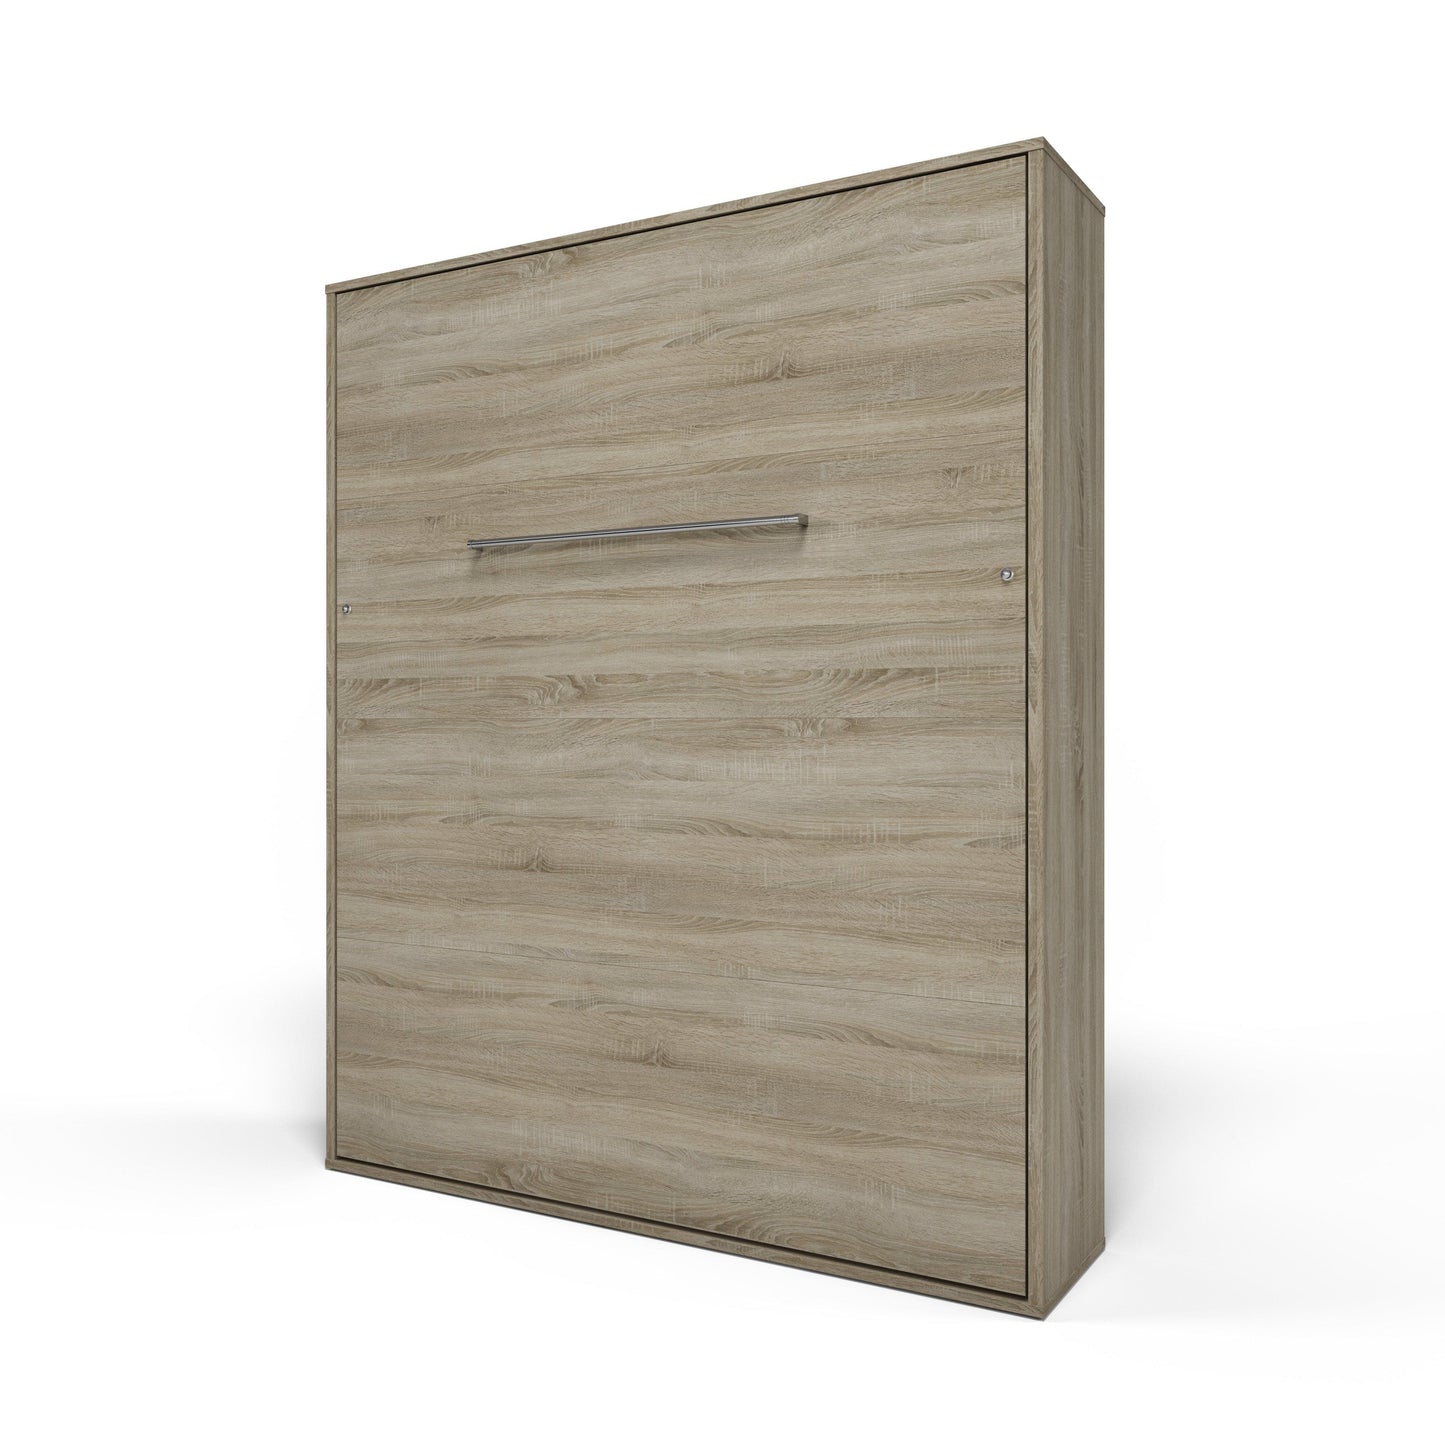 Maxima House Maxima House Invento Murphy Bed- Vertical, European, Queen, LED included IN-14S